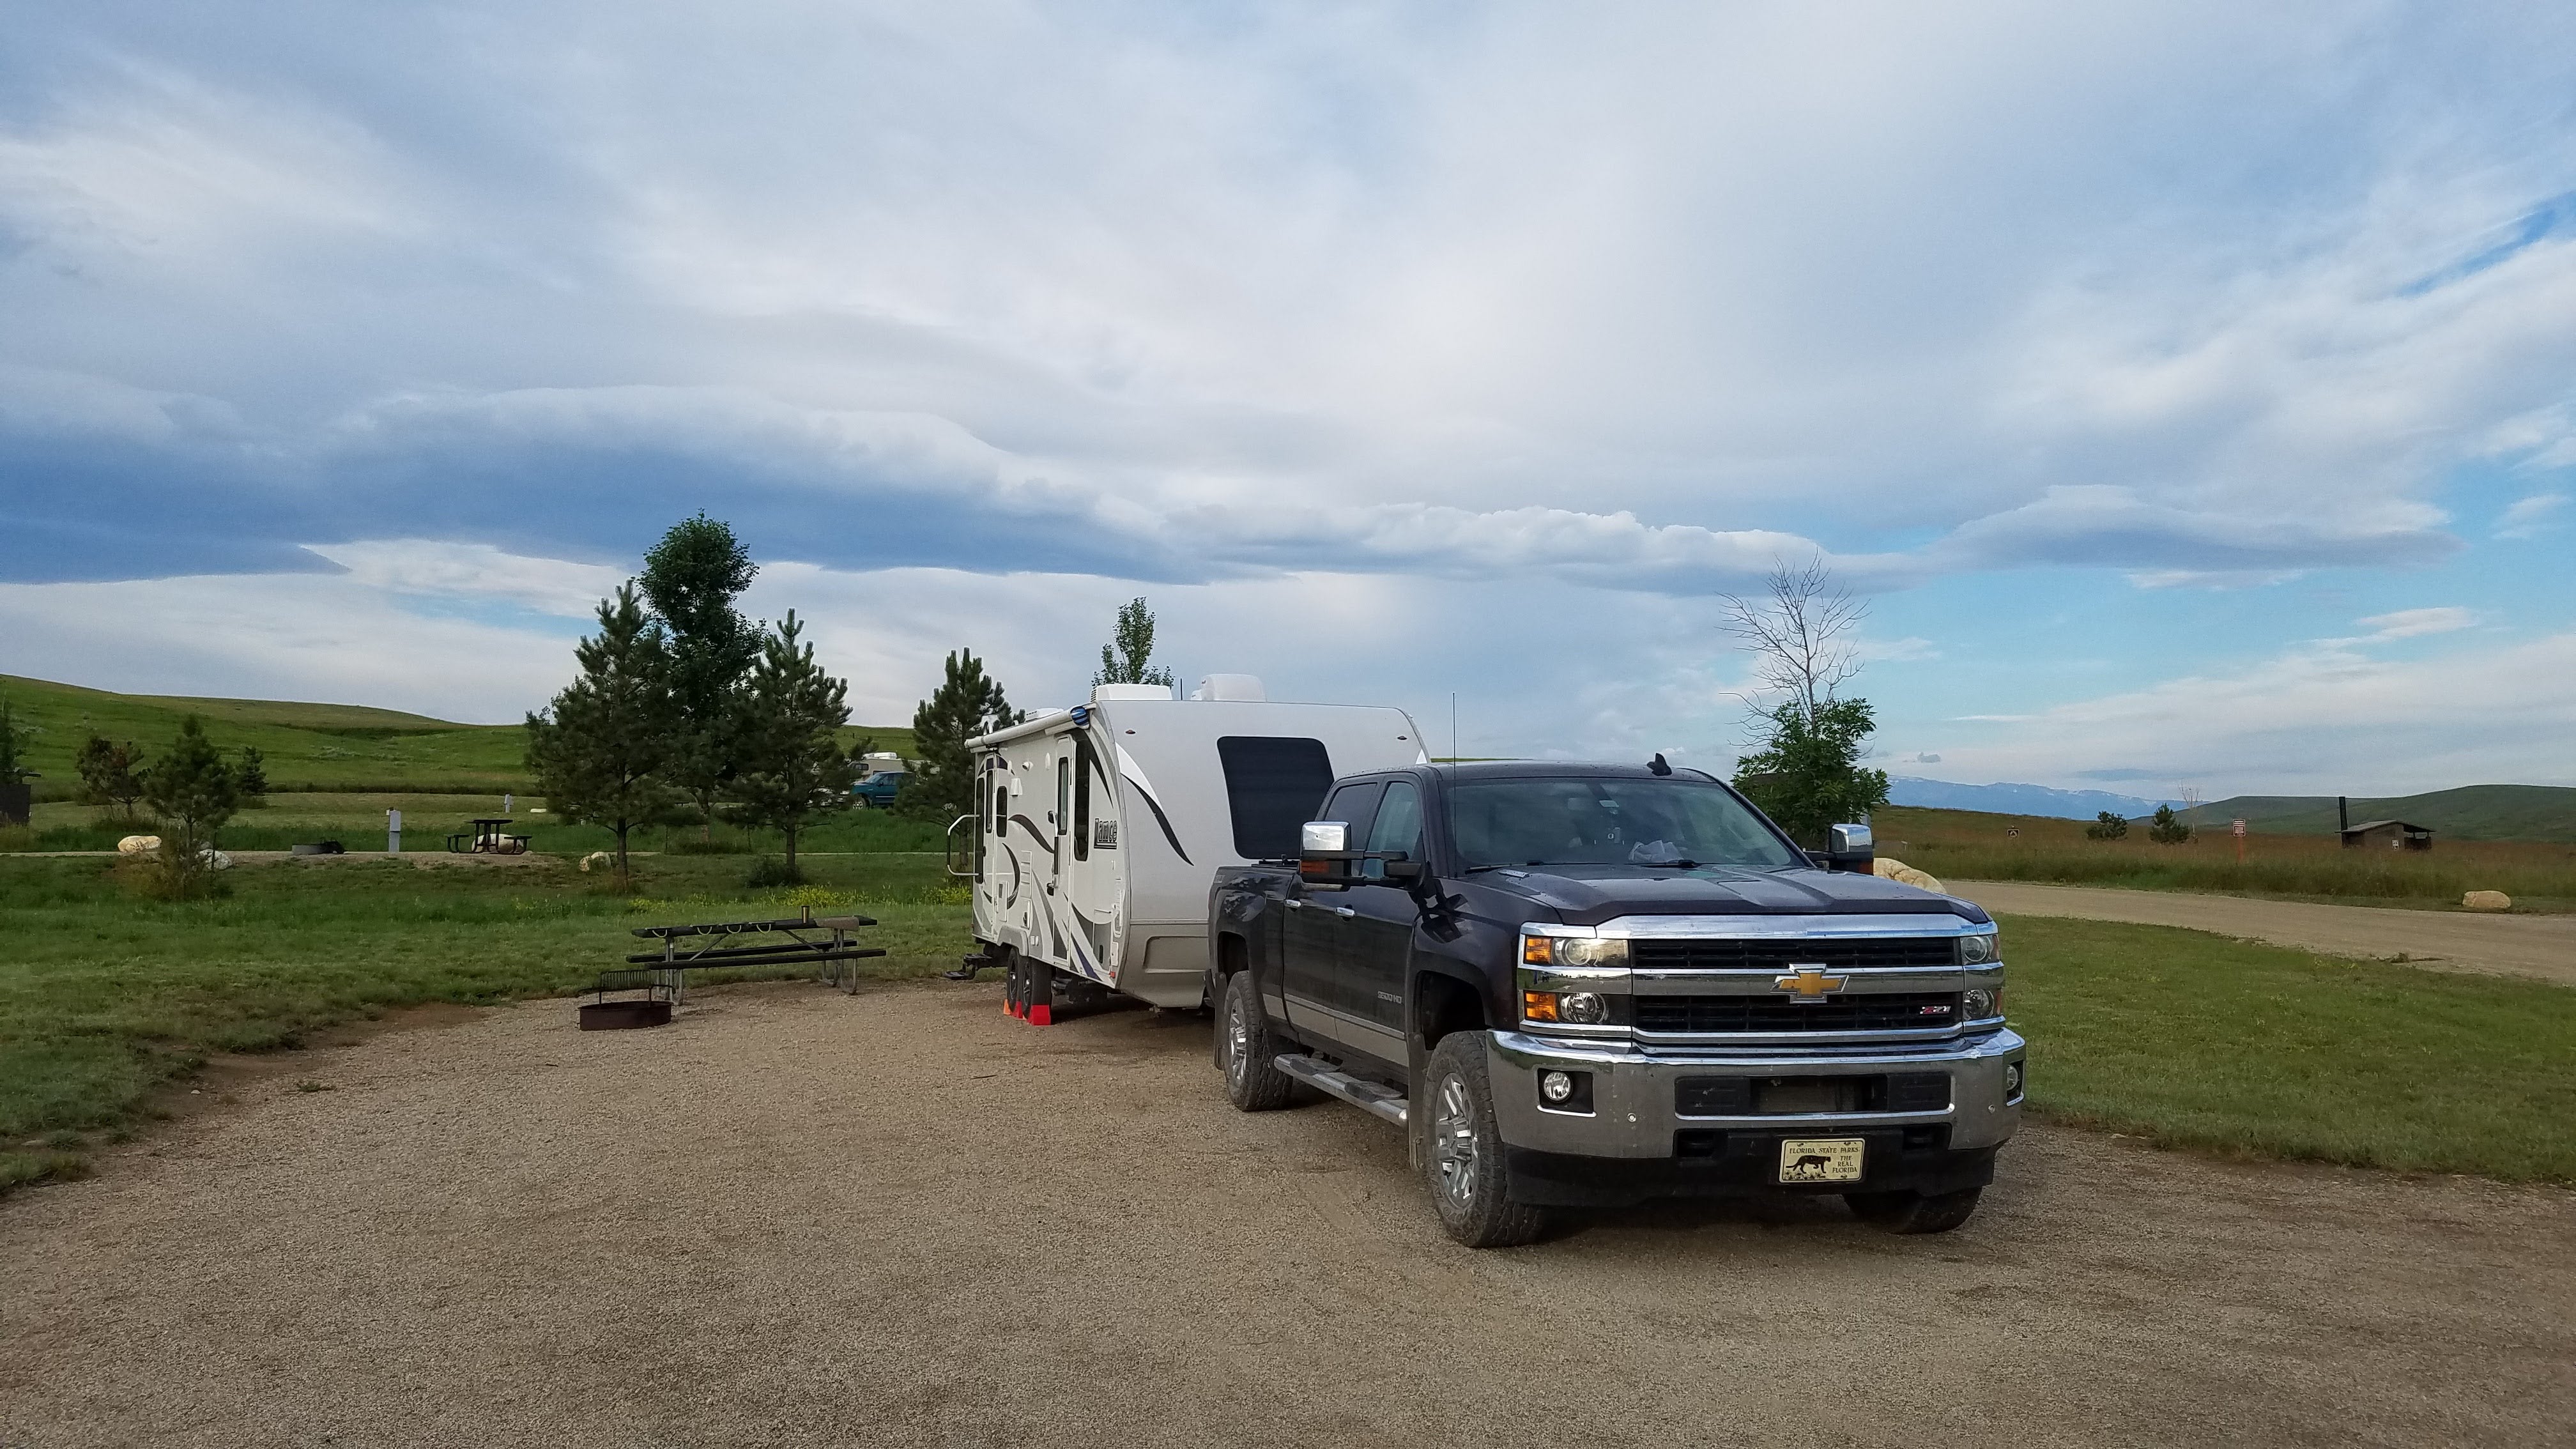 Camper submitted image from Cooney State Park Campground - 2